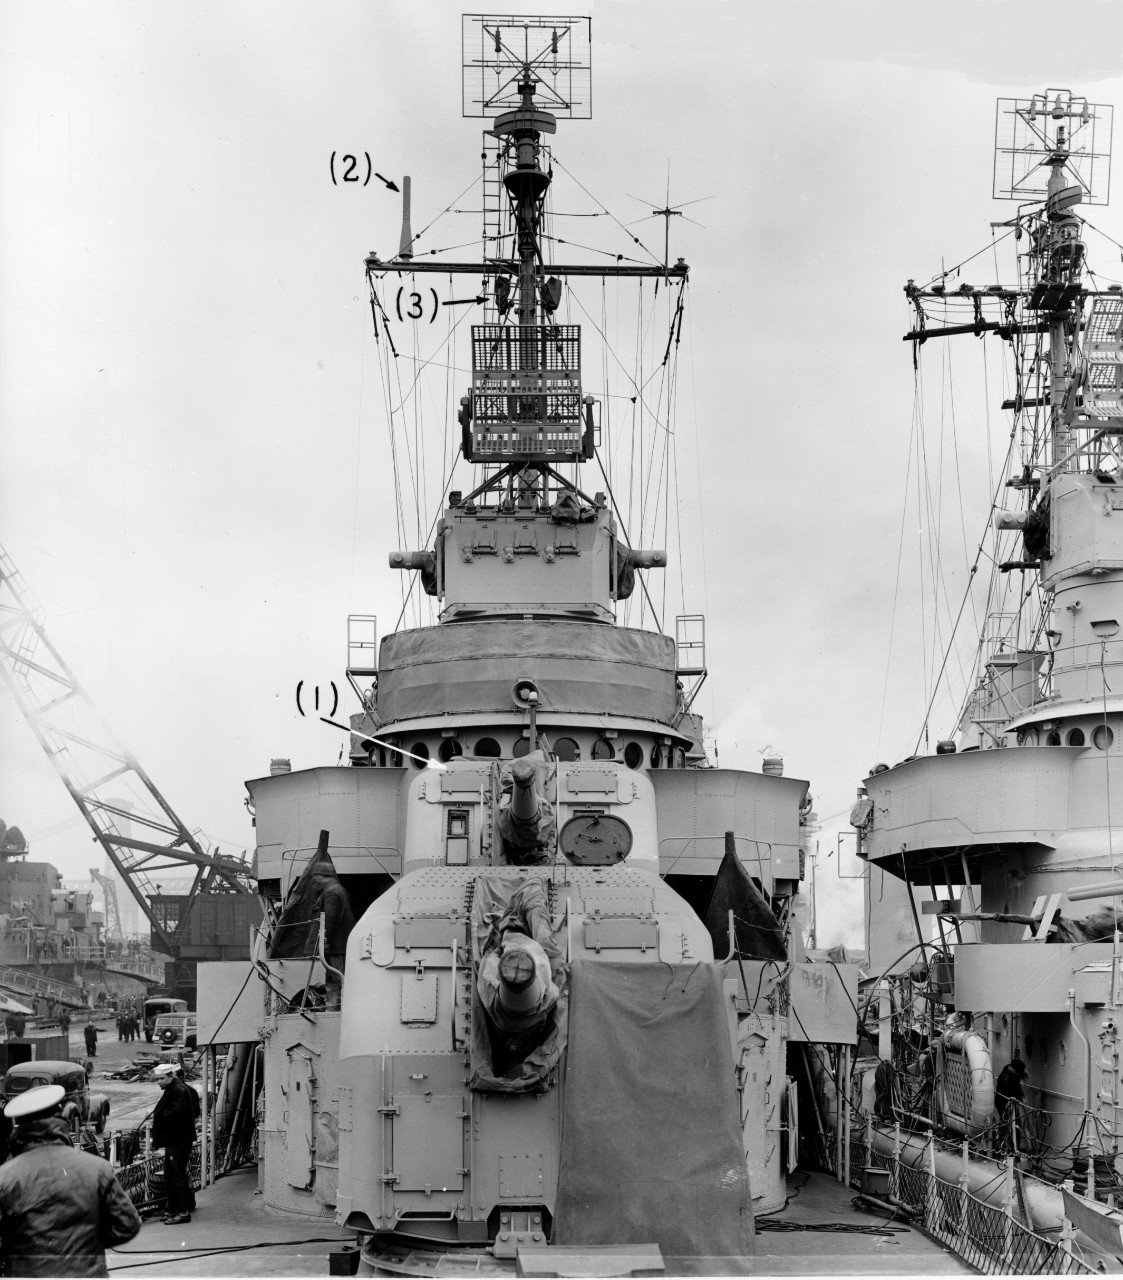 Strong at the New York Navy Yard three days before Christmas of 1942, Mt. 51 and Mt. 52 of her main battery prominent in the foreground. Parenthetical numbers refer to recent modifications: (1) the raised platform and foundation for a 20-millimet...